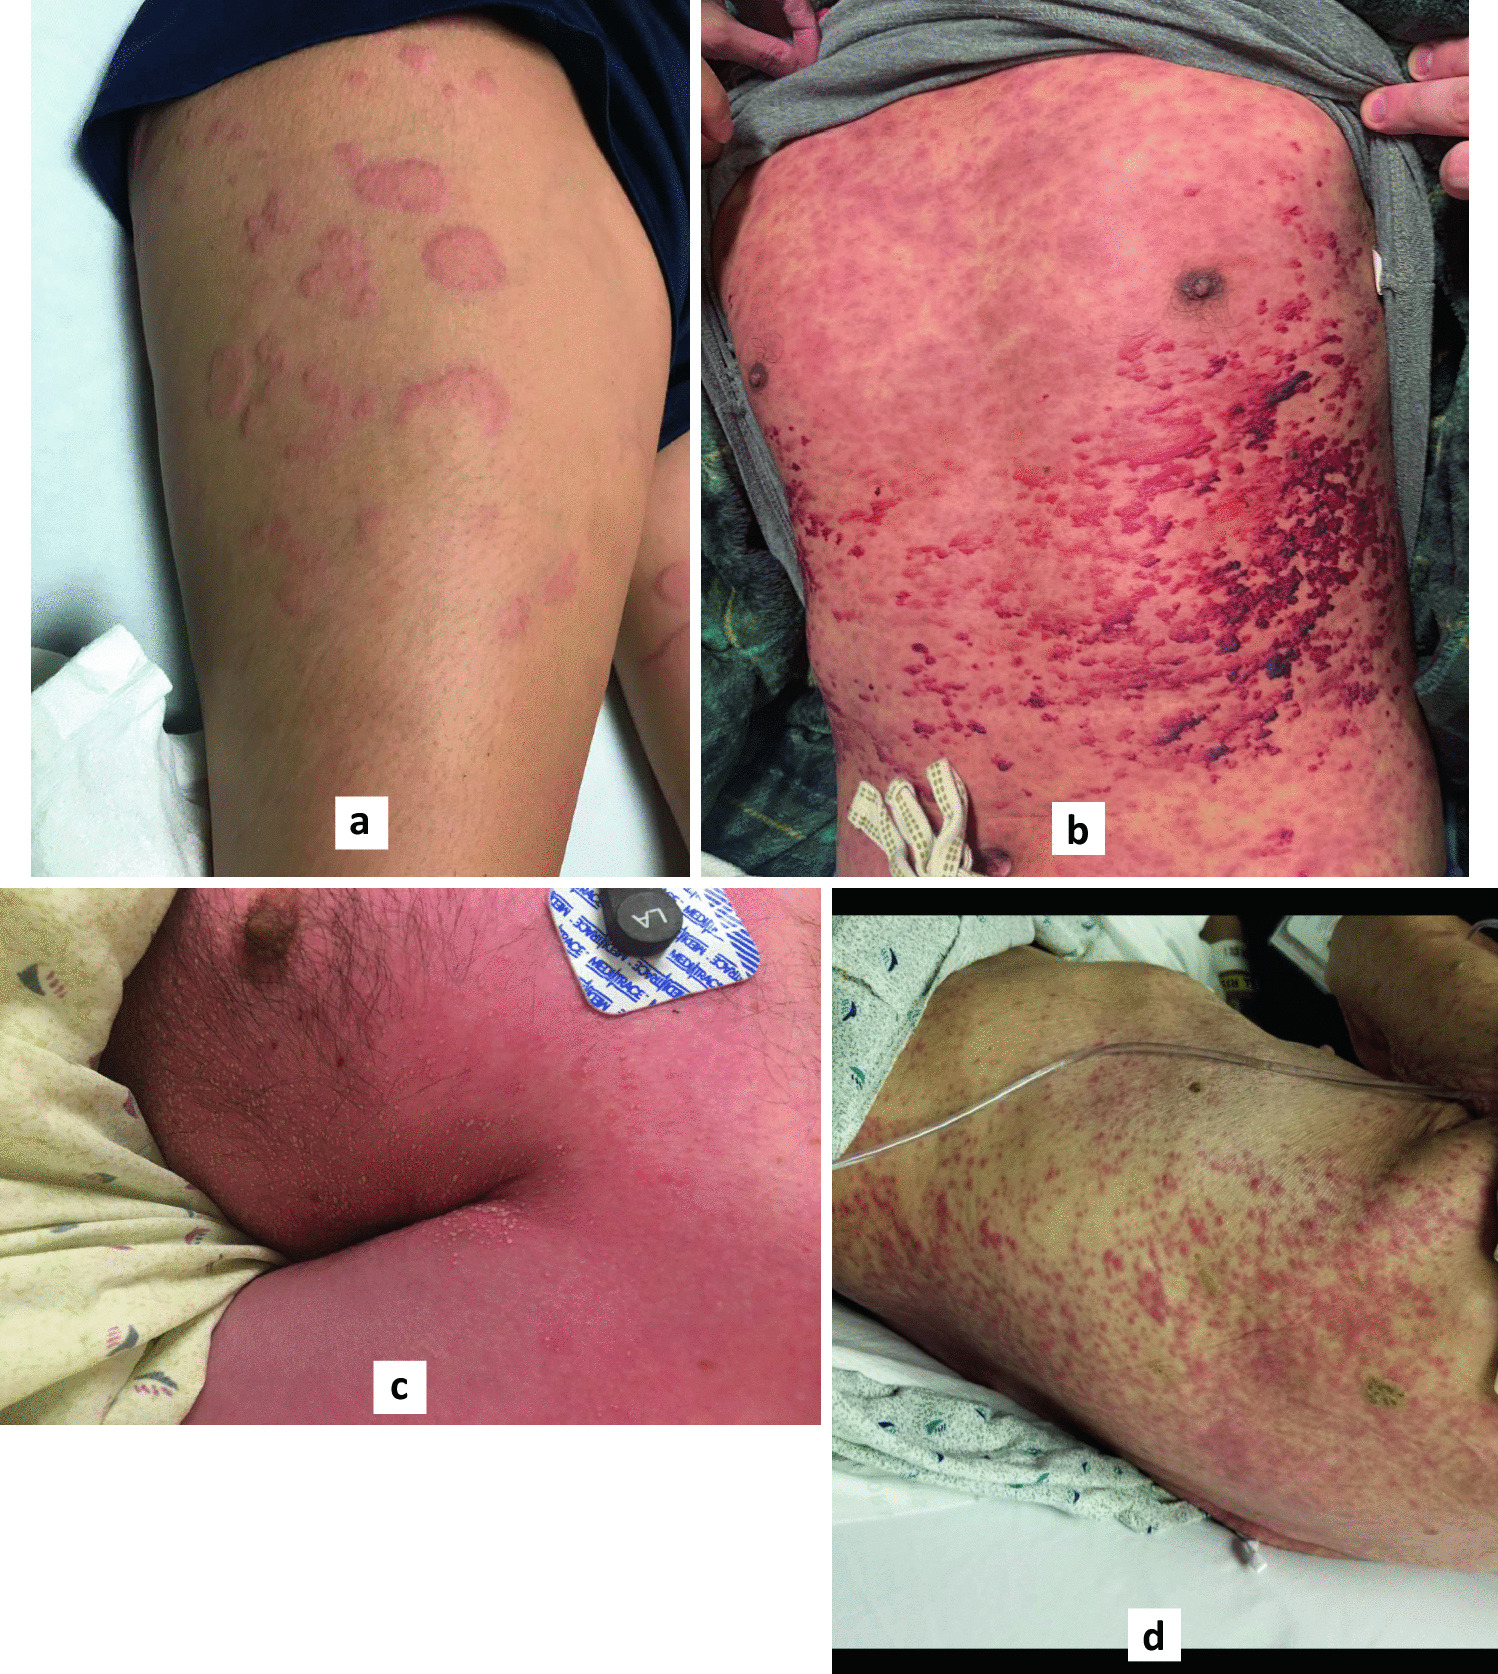 Distinguishing Benign Rashes From Severe Skin Reactions From Anti-Seizure Medications